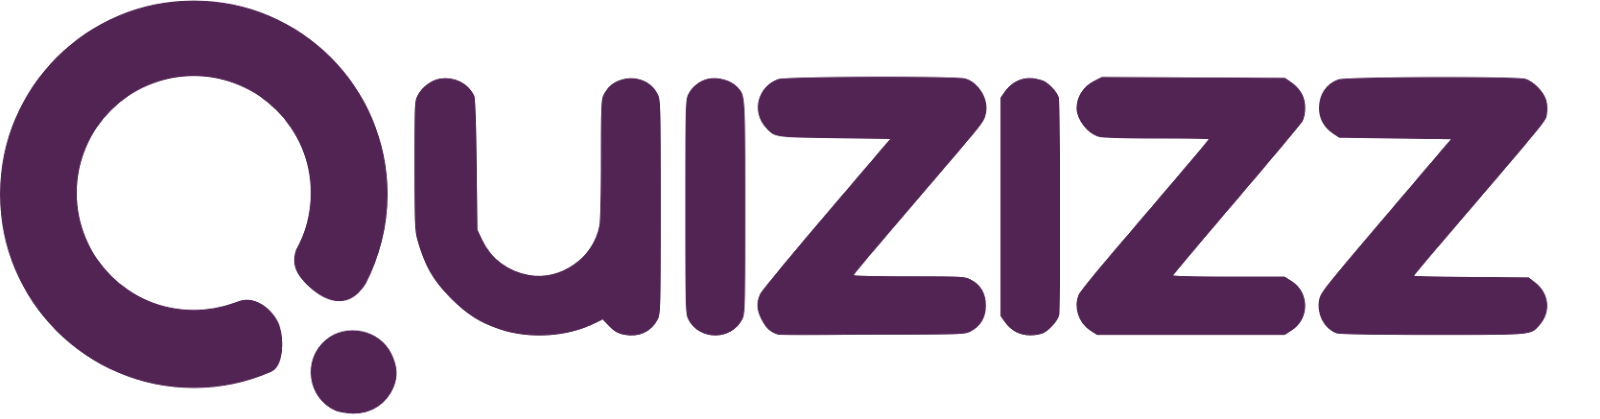 Join a Game - Quizizz  Quizzes, Game codes, Cute icons